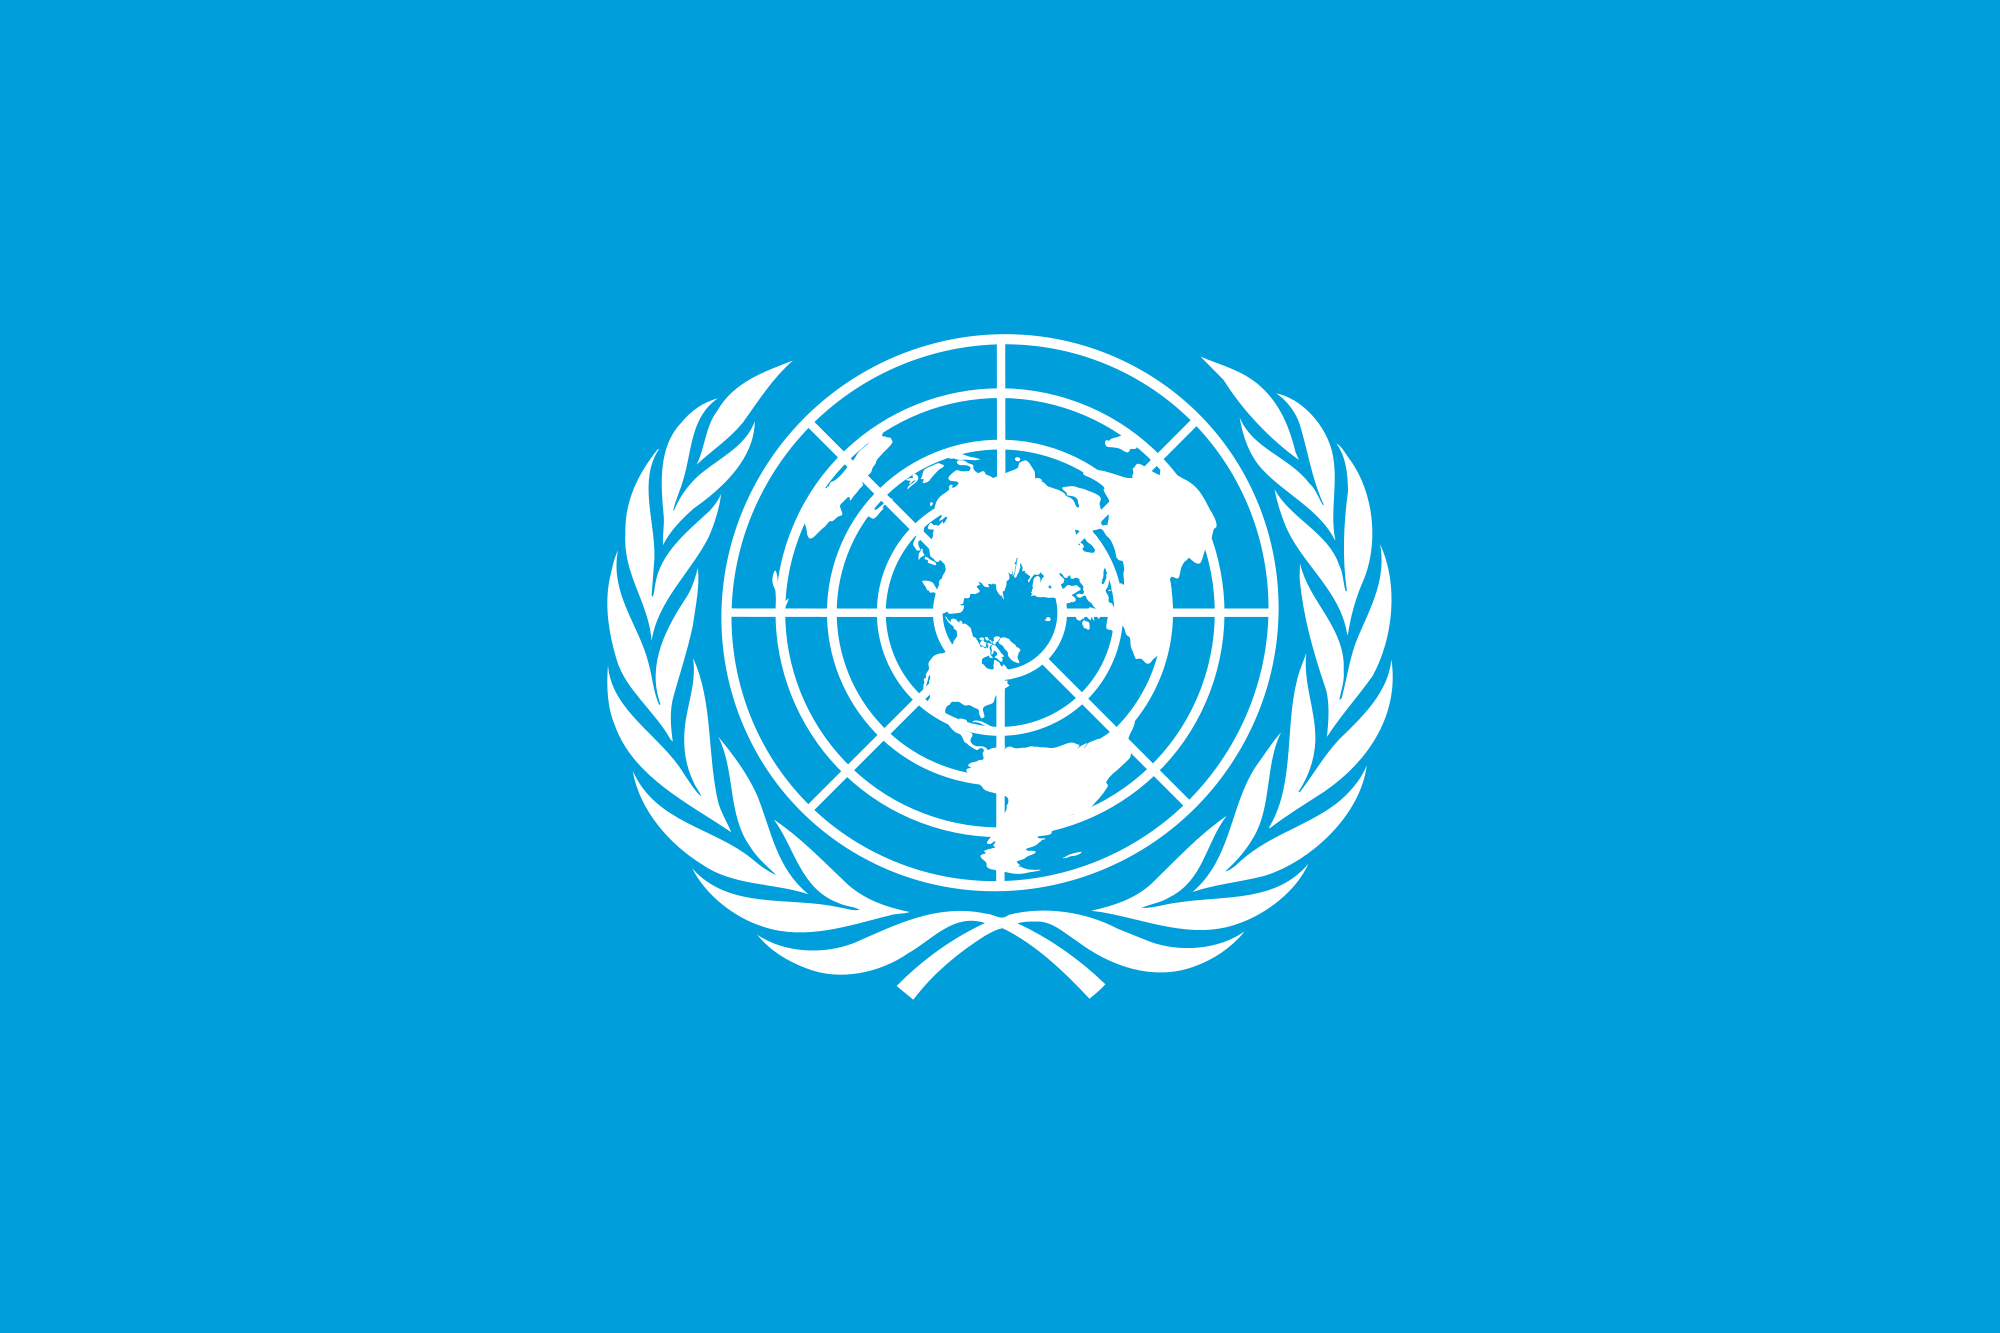 File:Flag of the UN.png